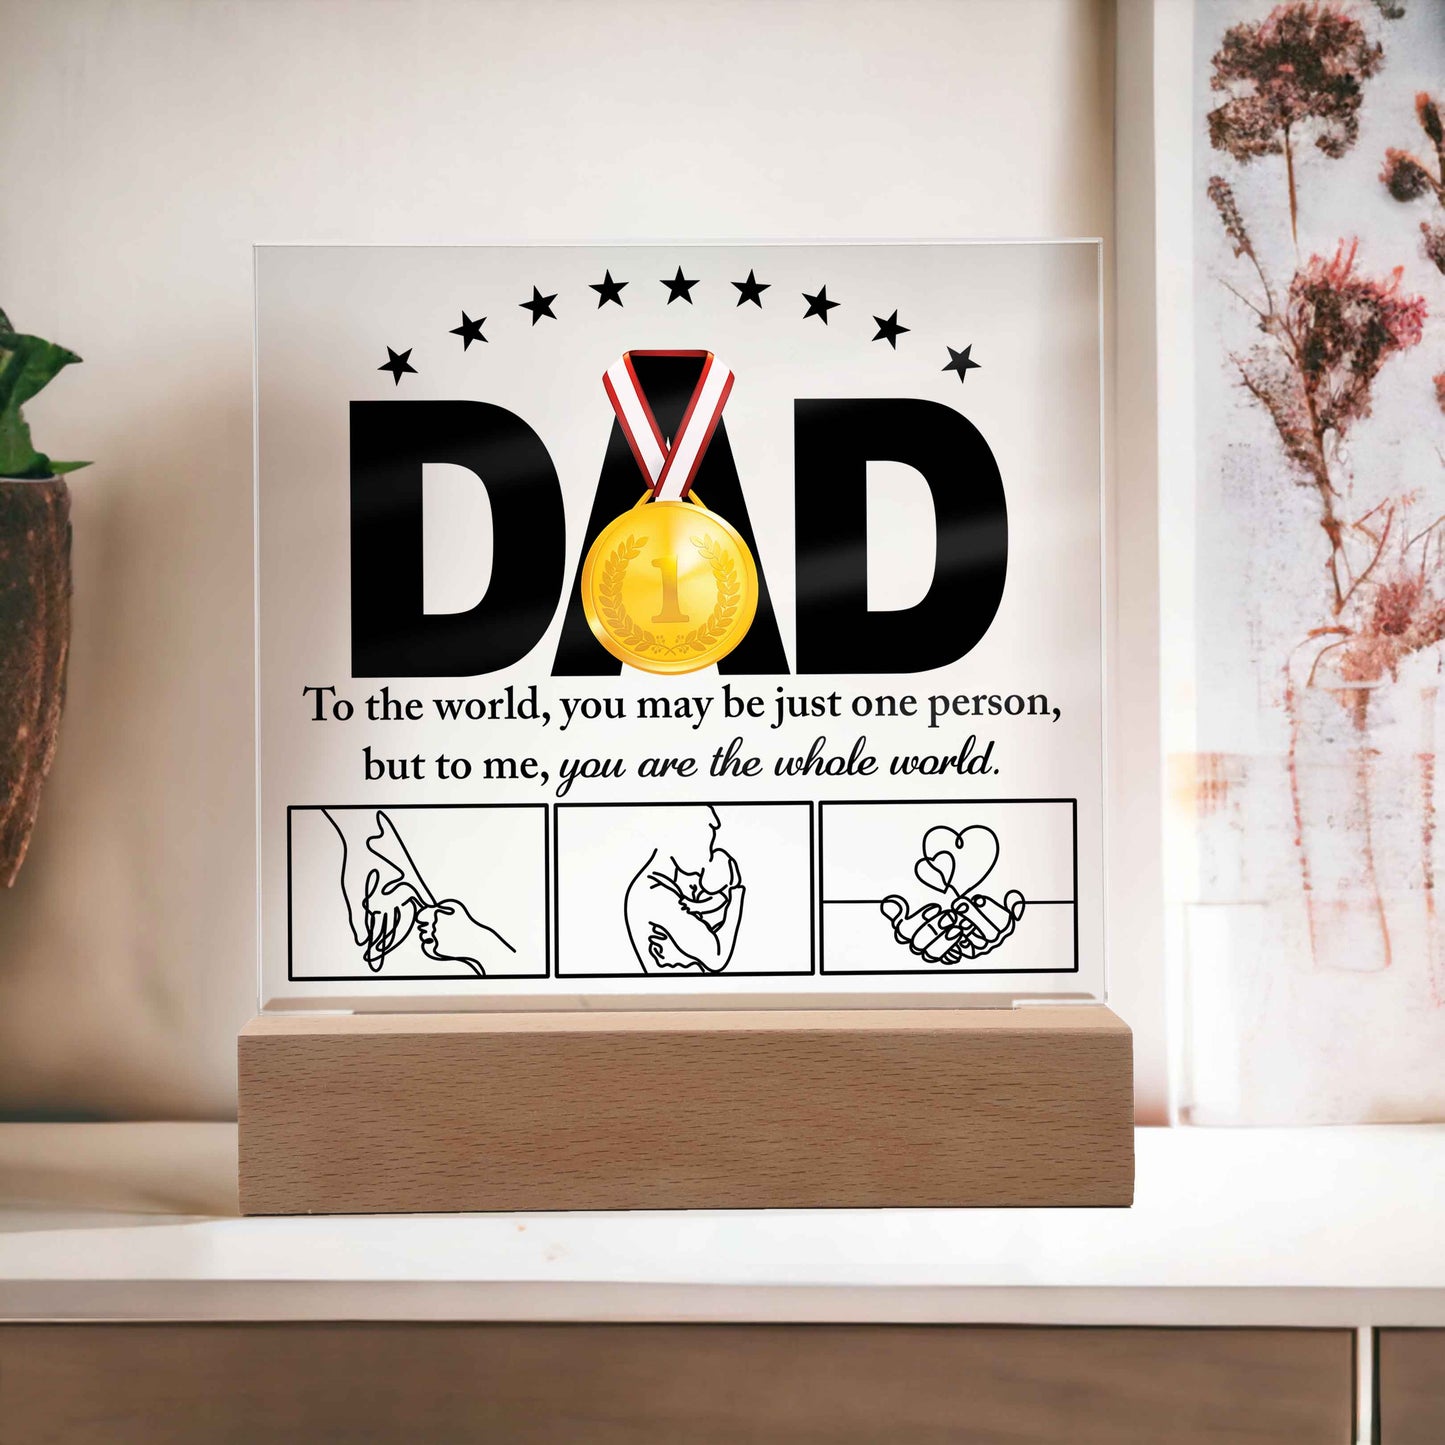 To My Dad, #1 Dad Award, To Me You Are The Whole World, Square Acrylic Plaque